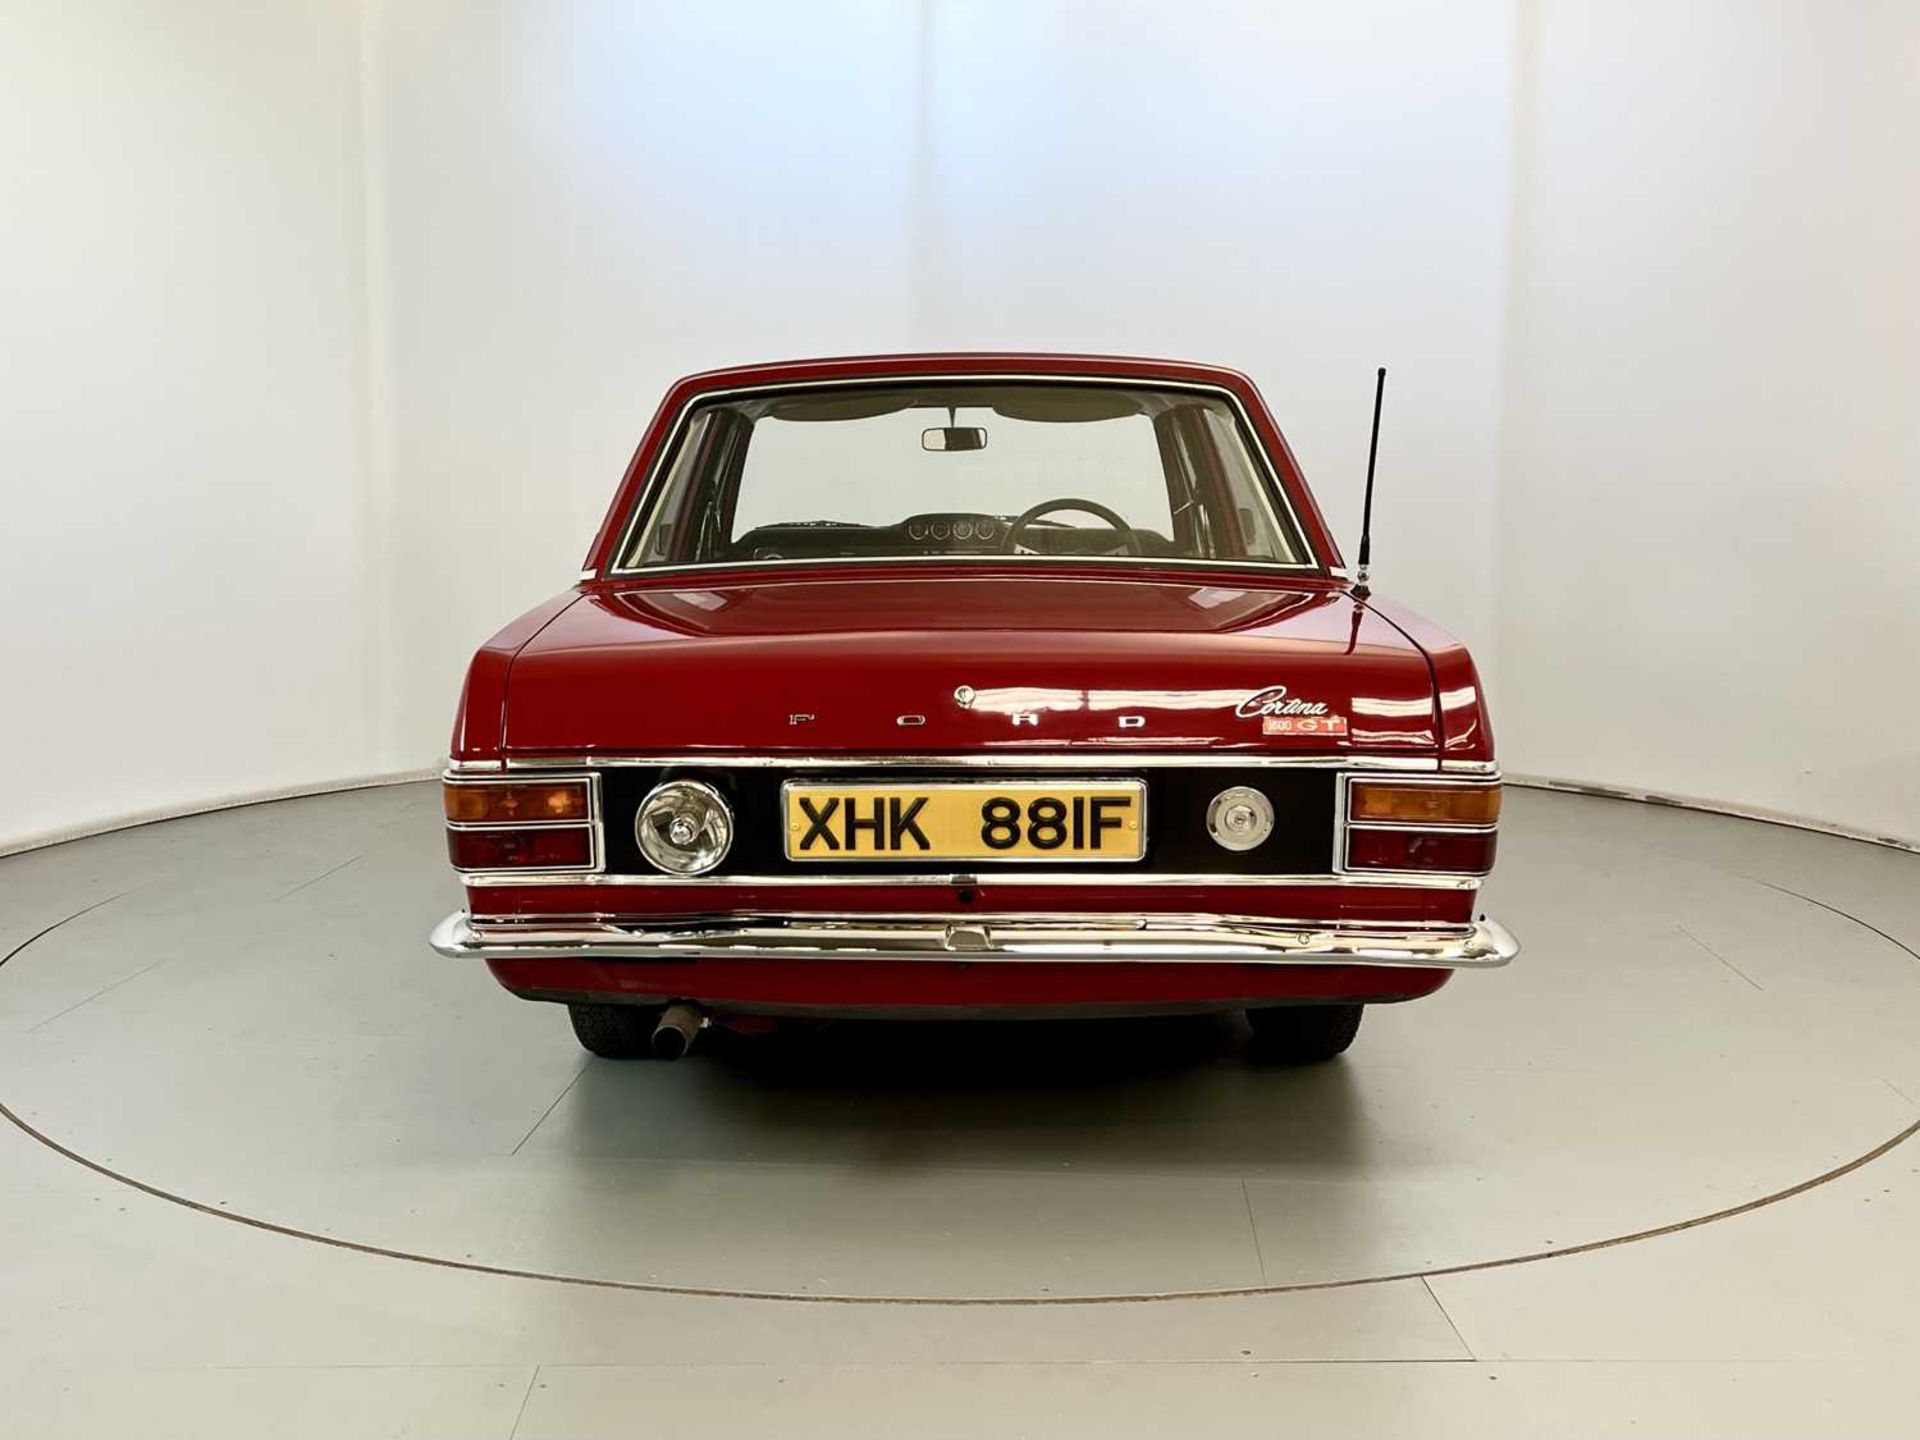 1967 Ford Cortina 1600GT - Image 8 of 37